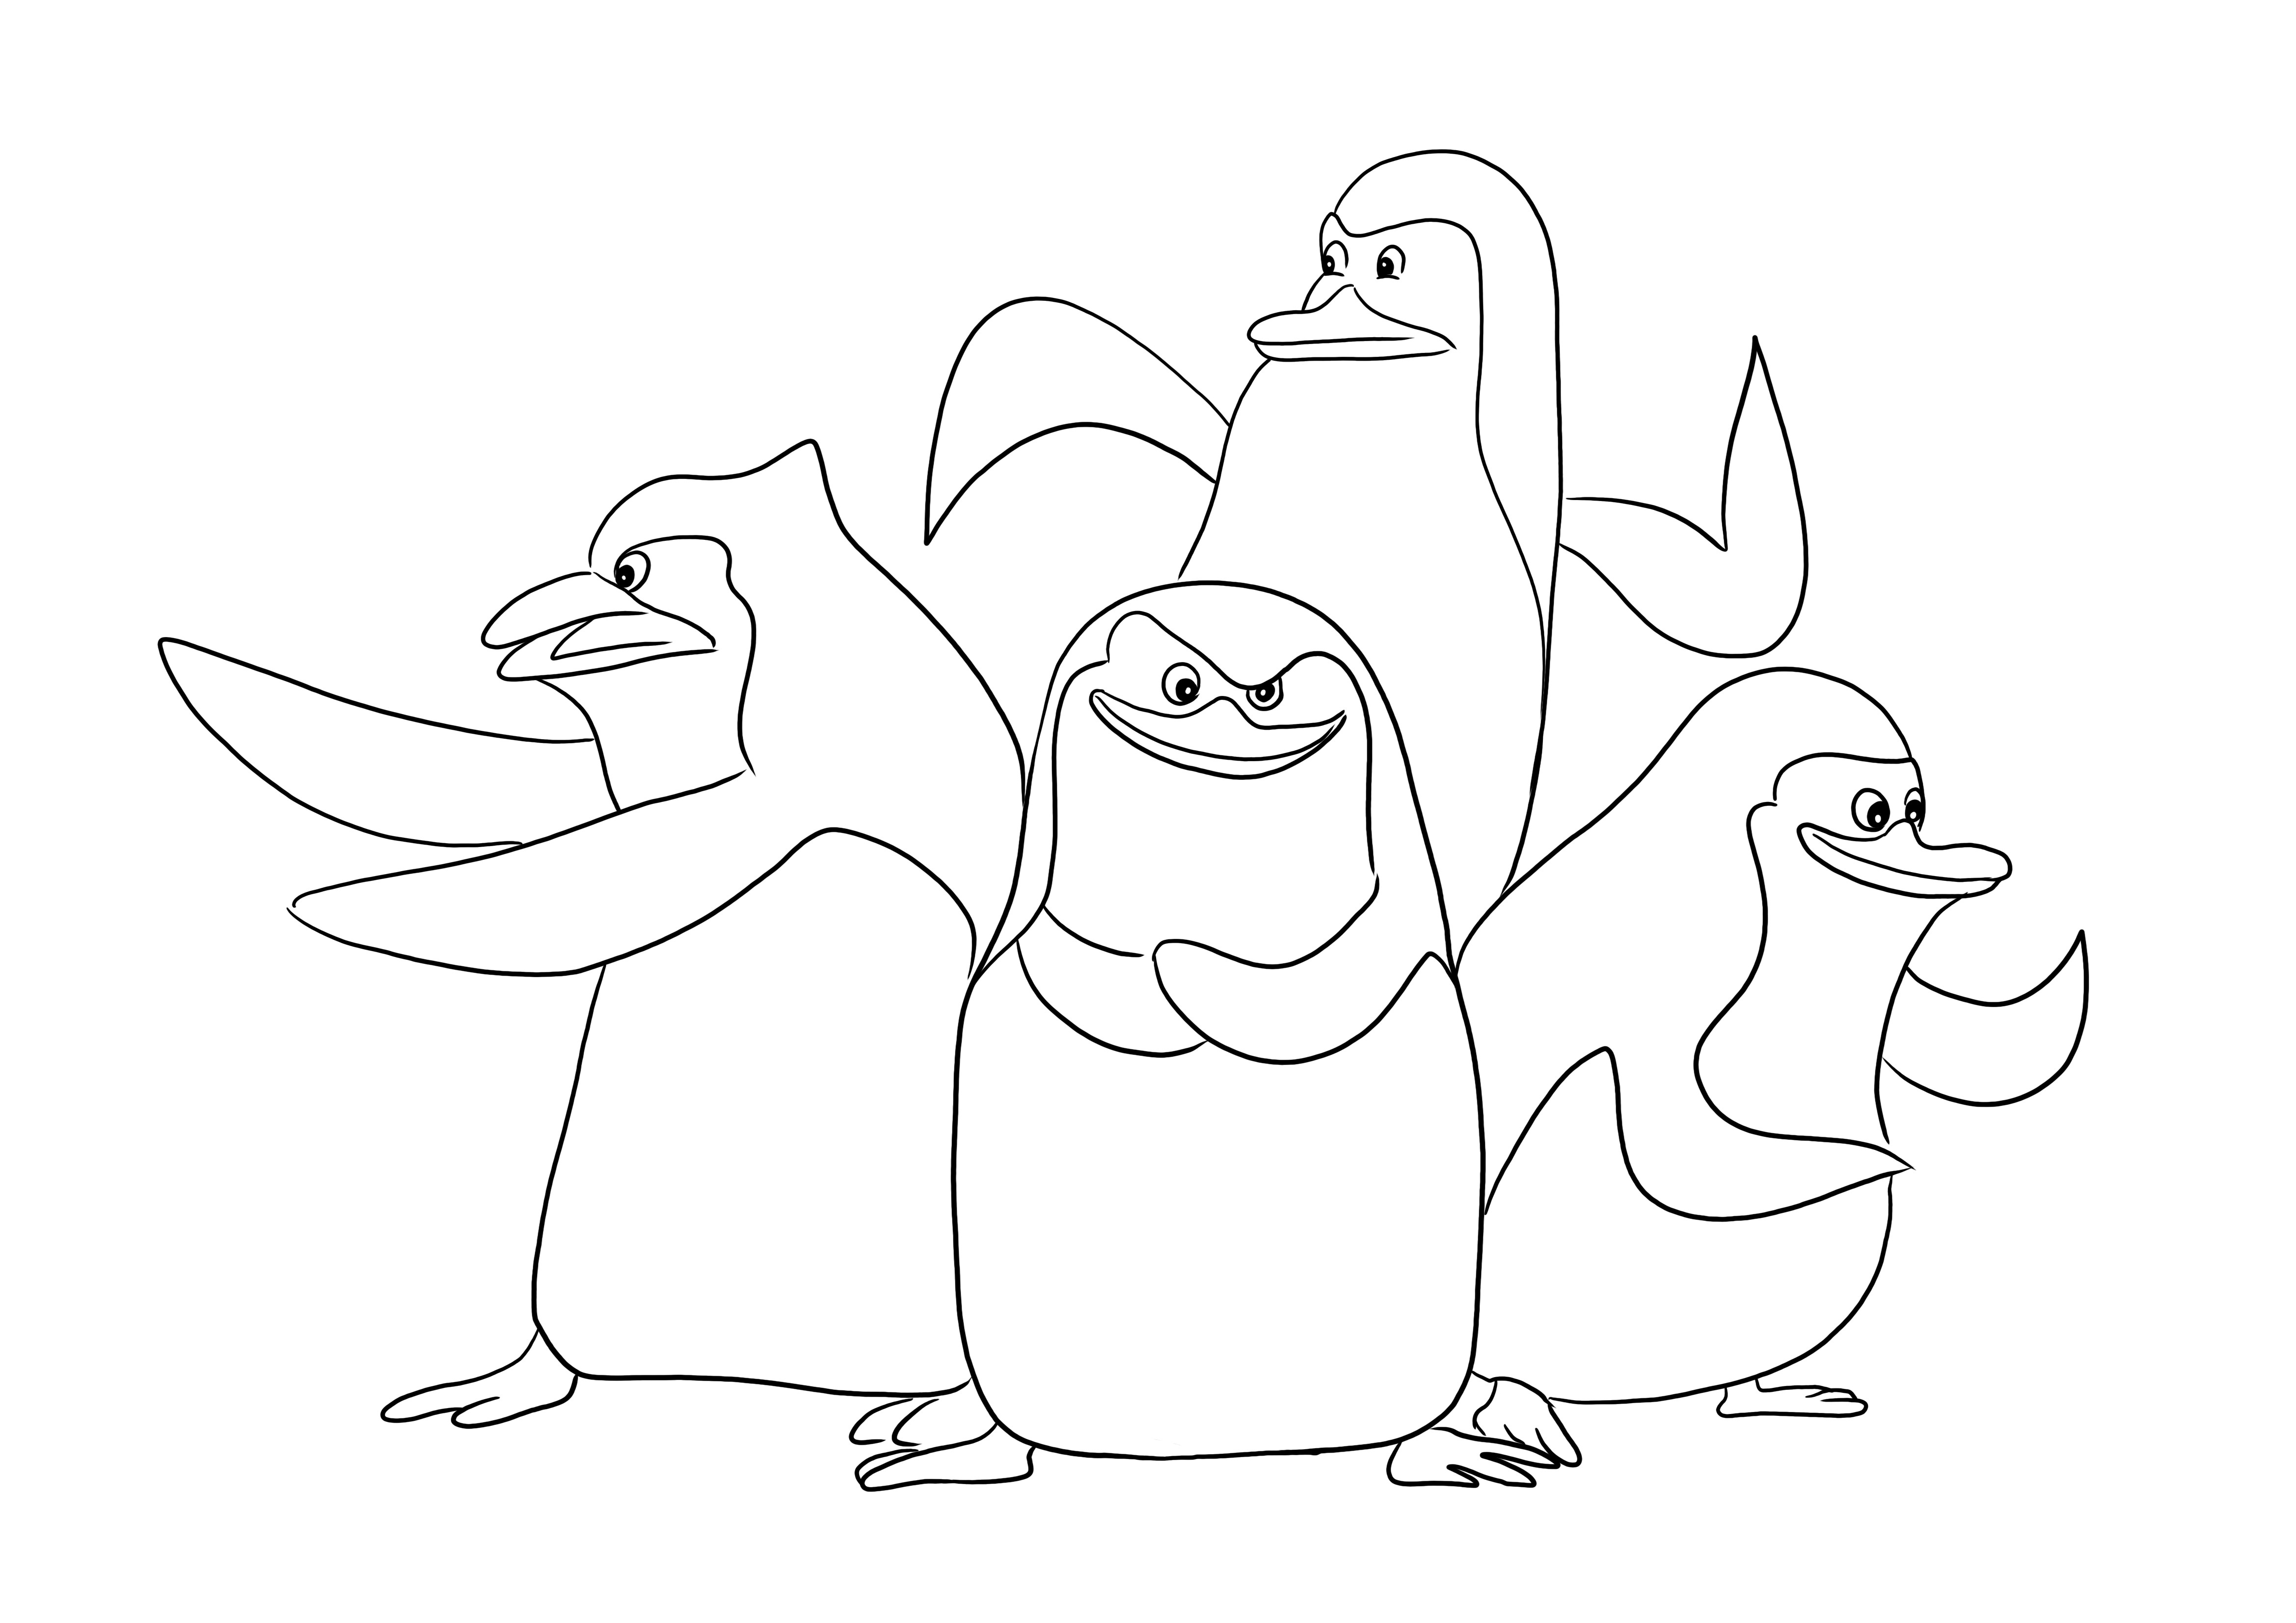 Madagascar Penguins free coloring and downloading picture